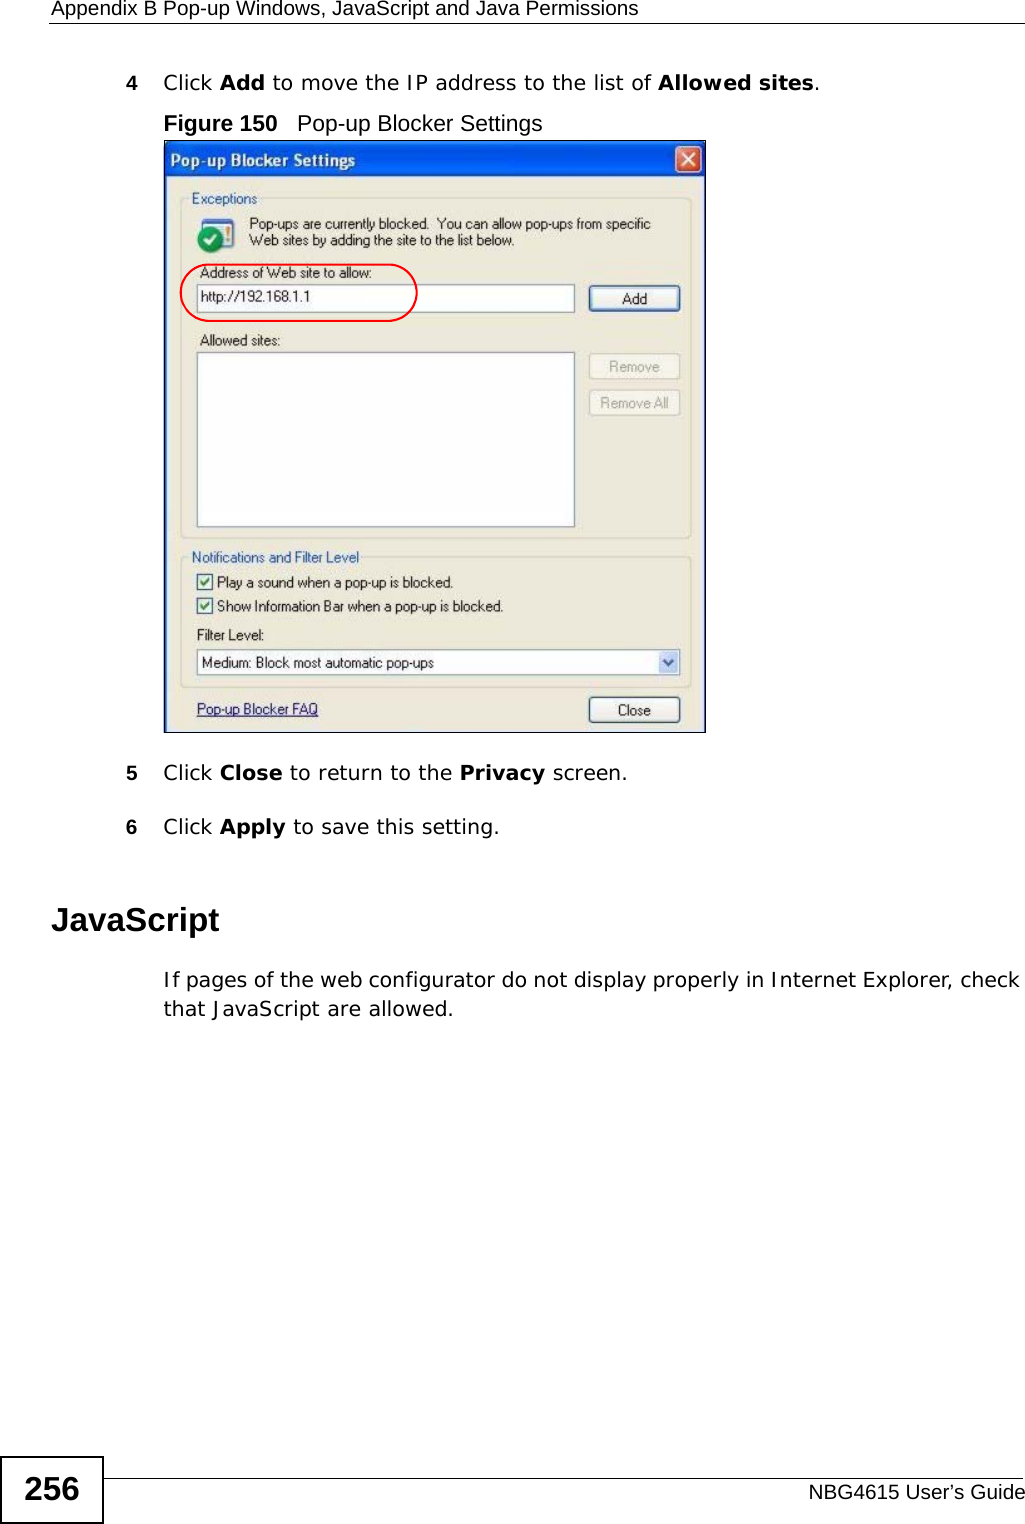 Appendix B Pop-up Windows, JavaScript and Java PermissionsNBG4615 User’s Guide2564Click Add to move the IP address to the list of Allowed sites.Figure 150   Pop-up Blocker Settings5Click Close to return to the Privacy screen. 6Click Apply to save this setting. JavaScriptIf pages of the web configurator do not display properly in Internet Explorer, check that JavaScript are allowed. 